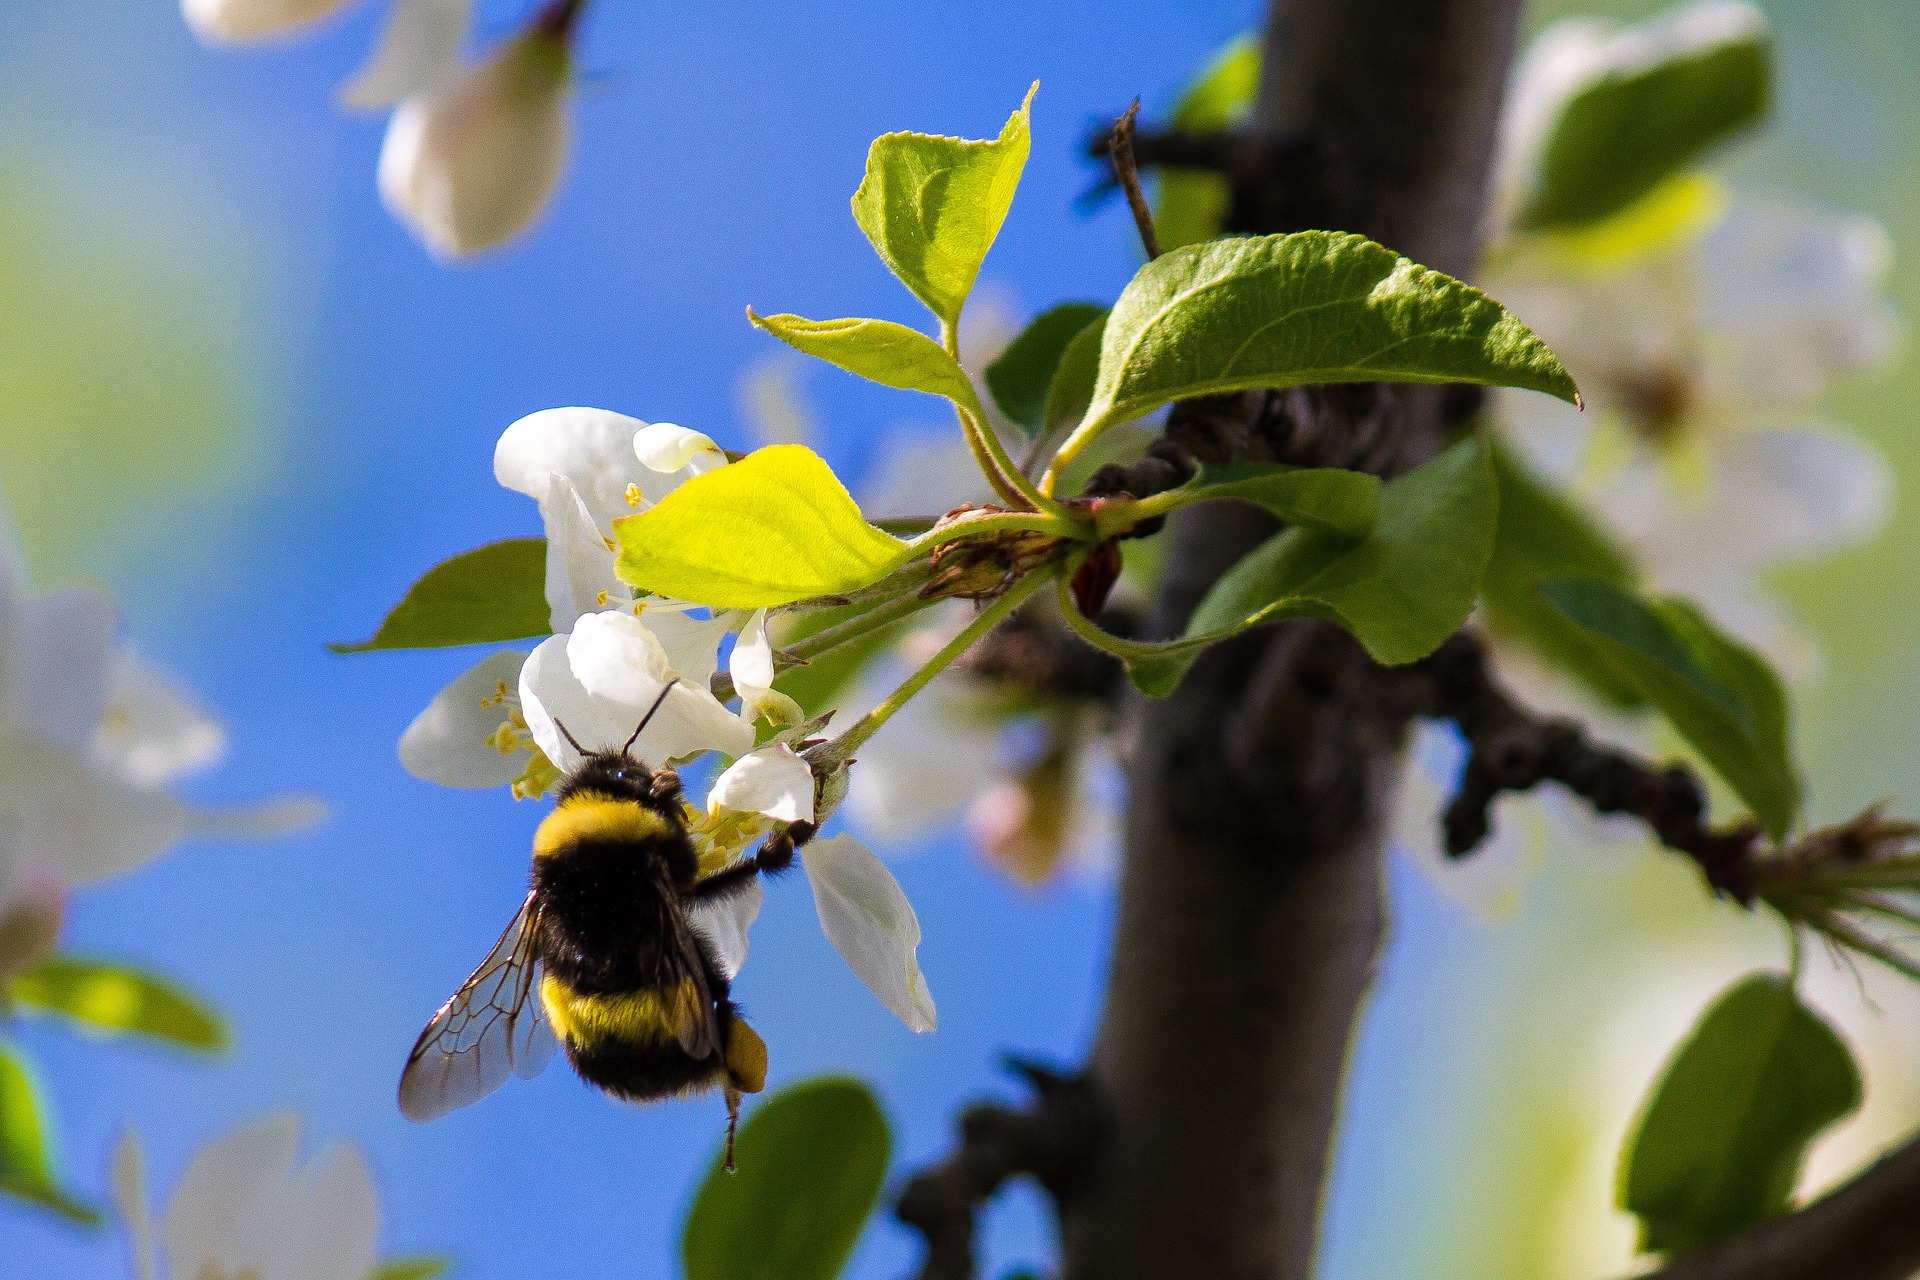 Bumble bee on apple blossom.